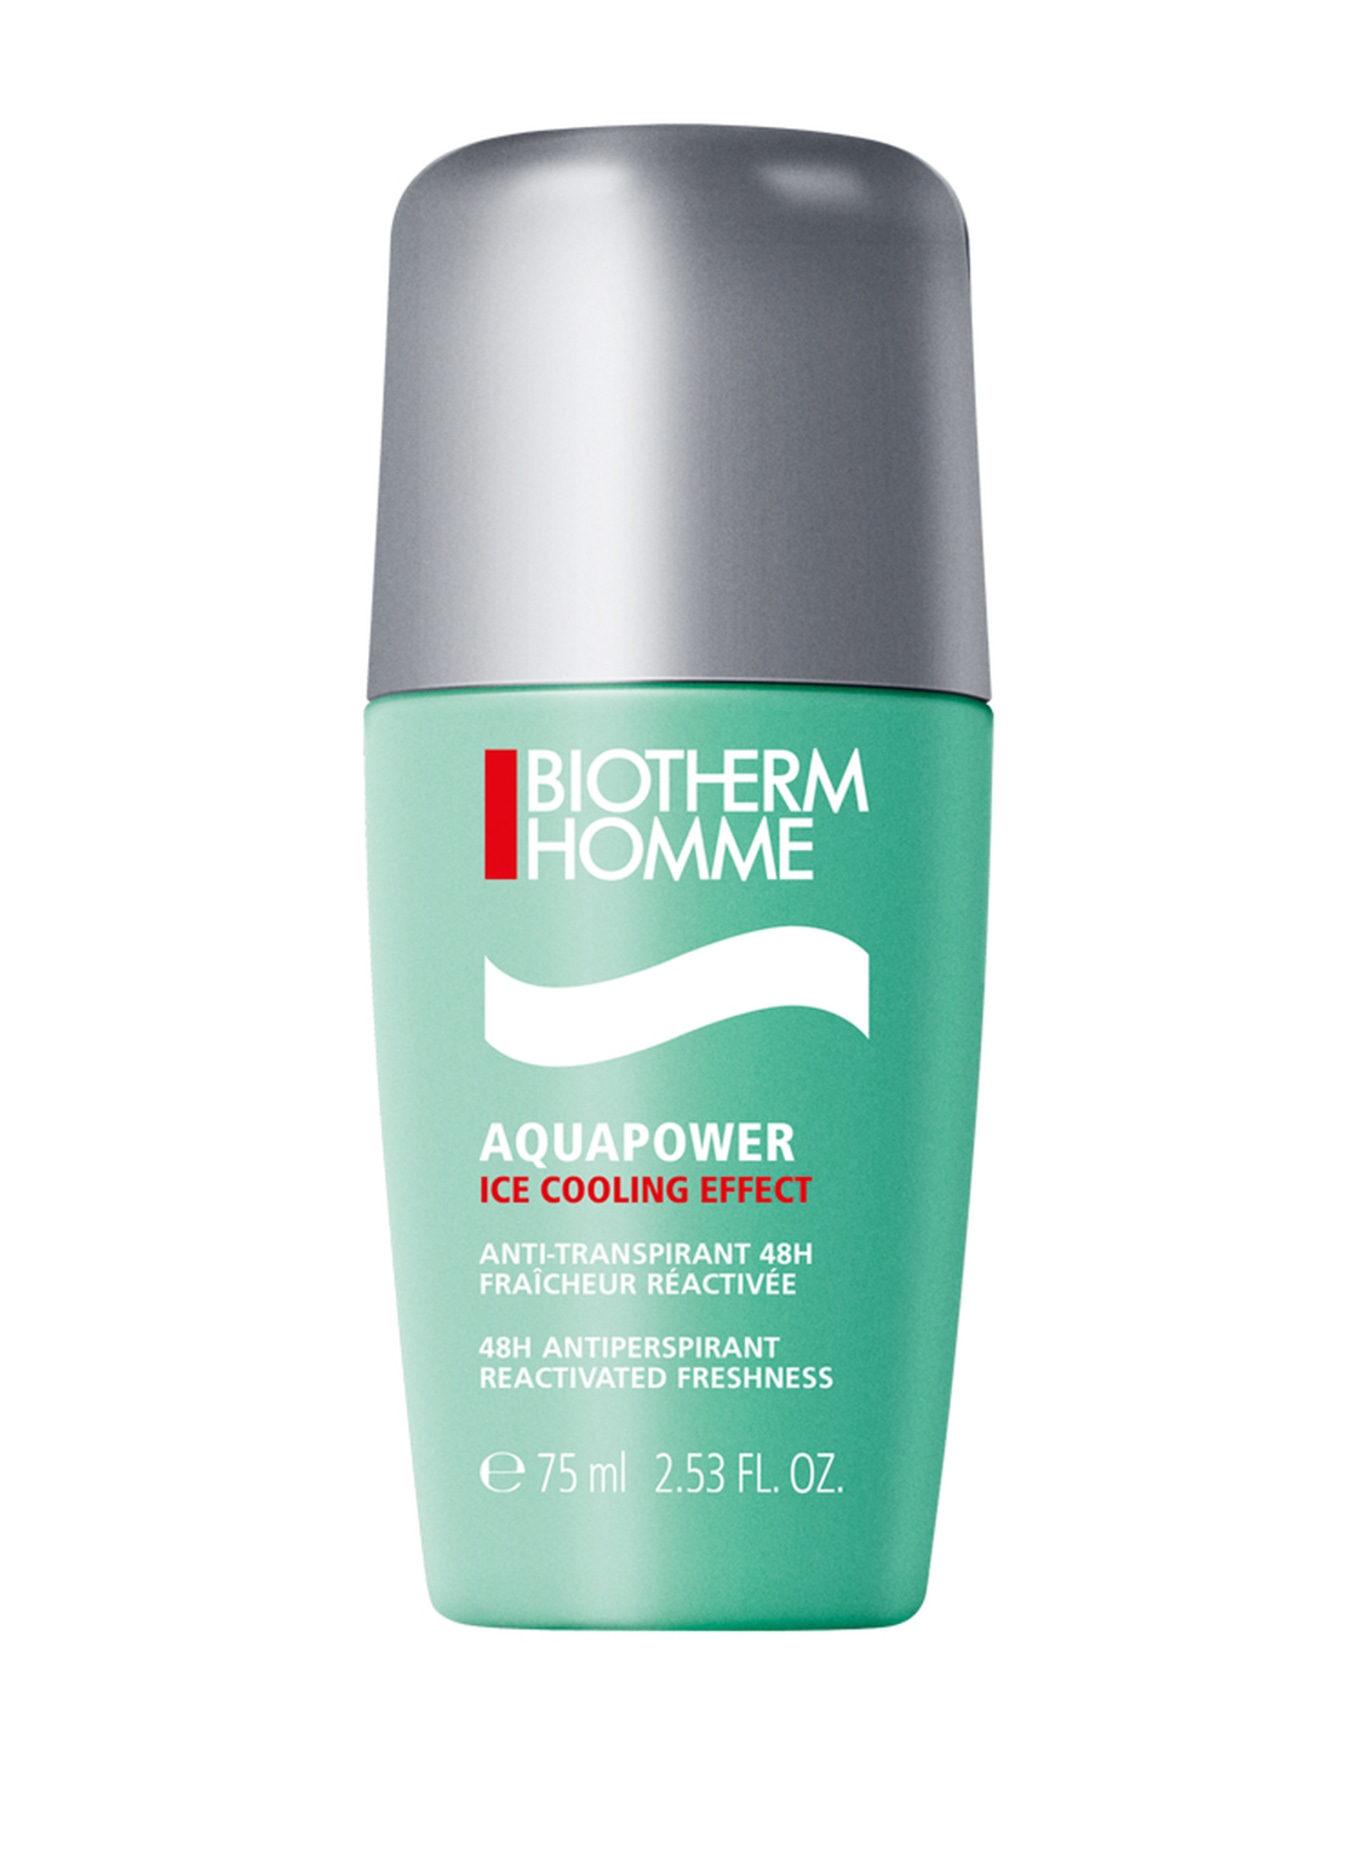 BIOTHERM AQUAPOWER ICE COOLING EFFECT 48H(Bild null)